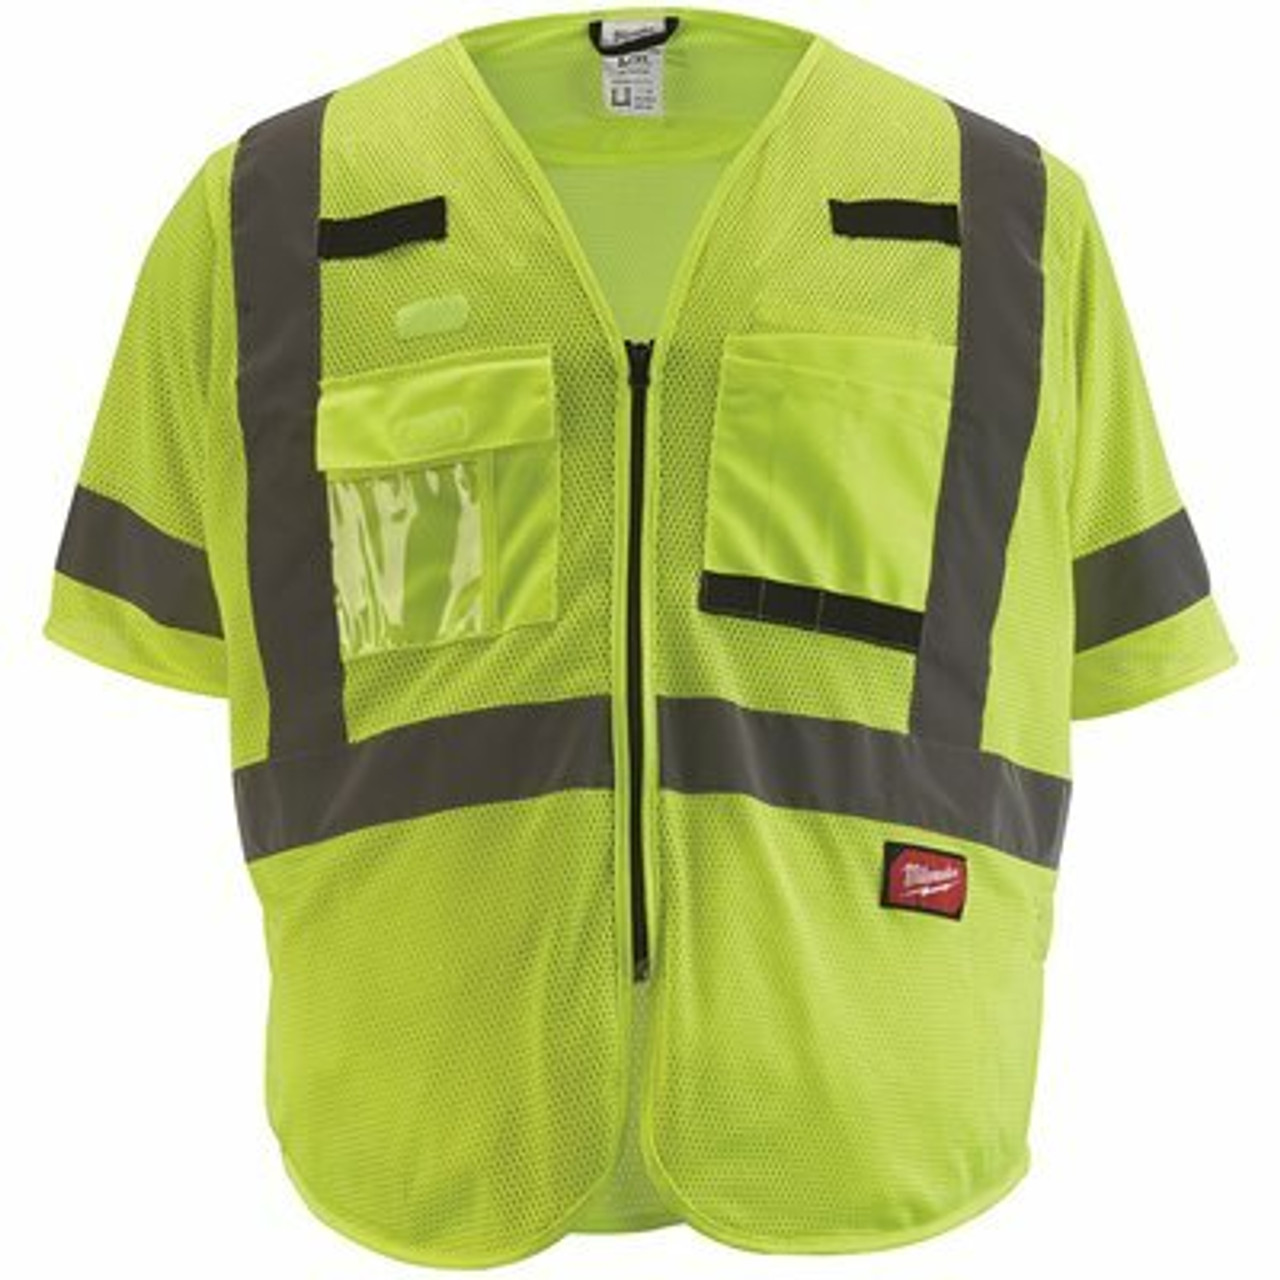 Milwaukee Large/X-Large Yellow Class 3 Mesh High Visibility Safety Vest With 9-Pockets And Sleeves